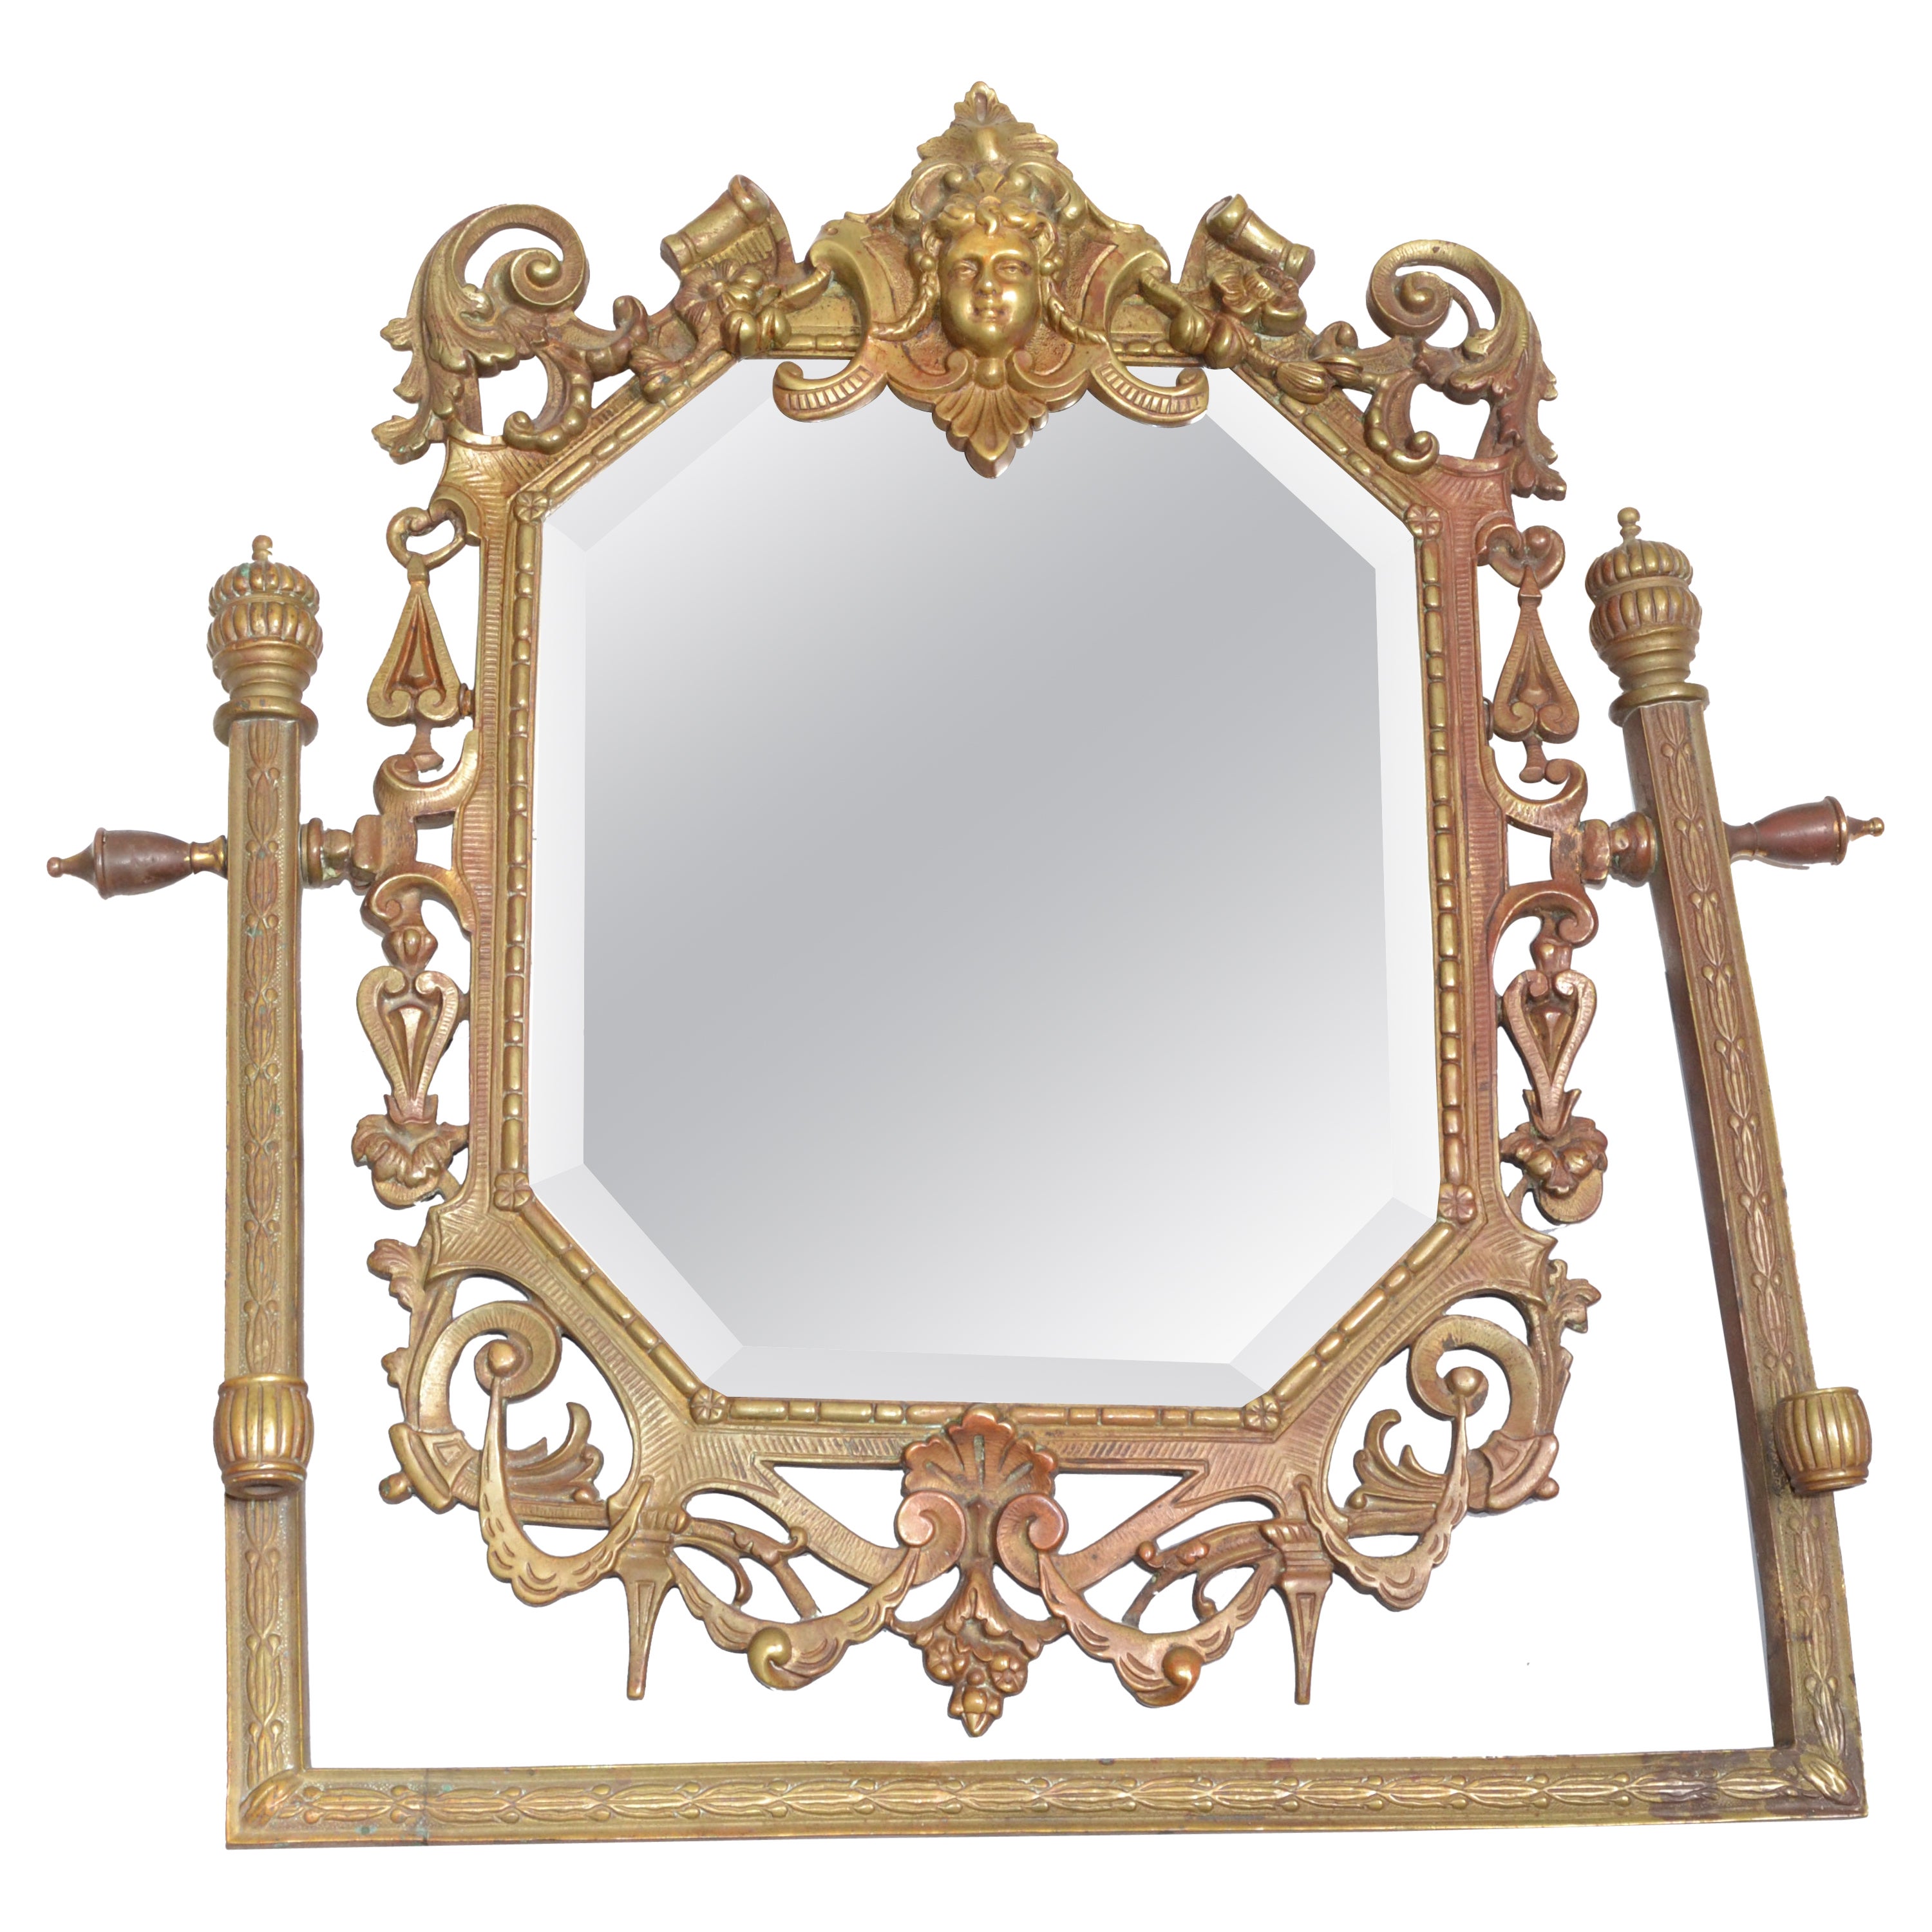 19th Century Ornate Sculpted Bronze Baroque Rectangle Beveled Wall Mirror For Sale